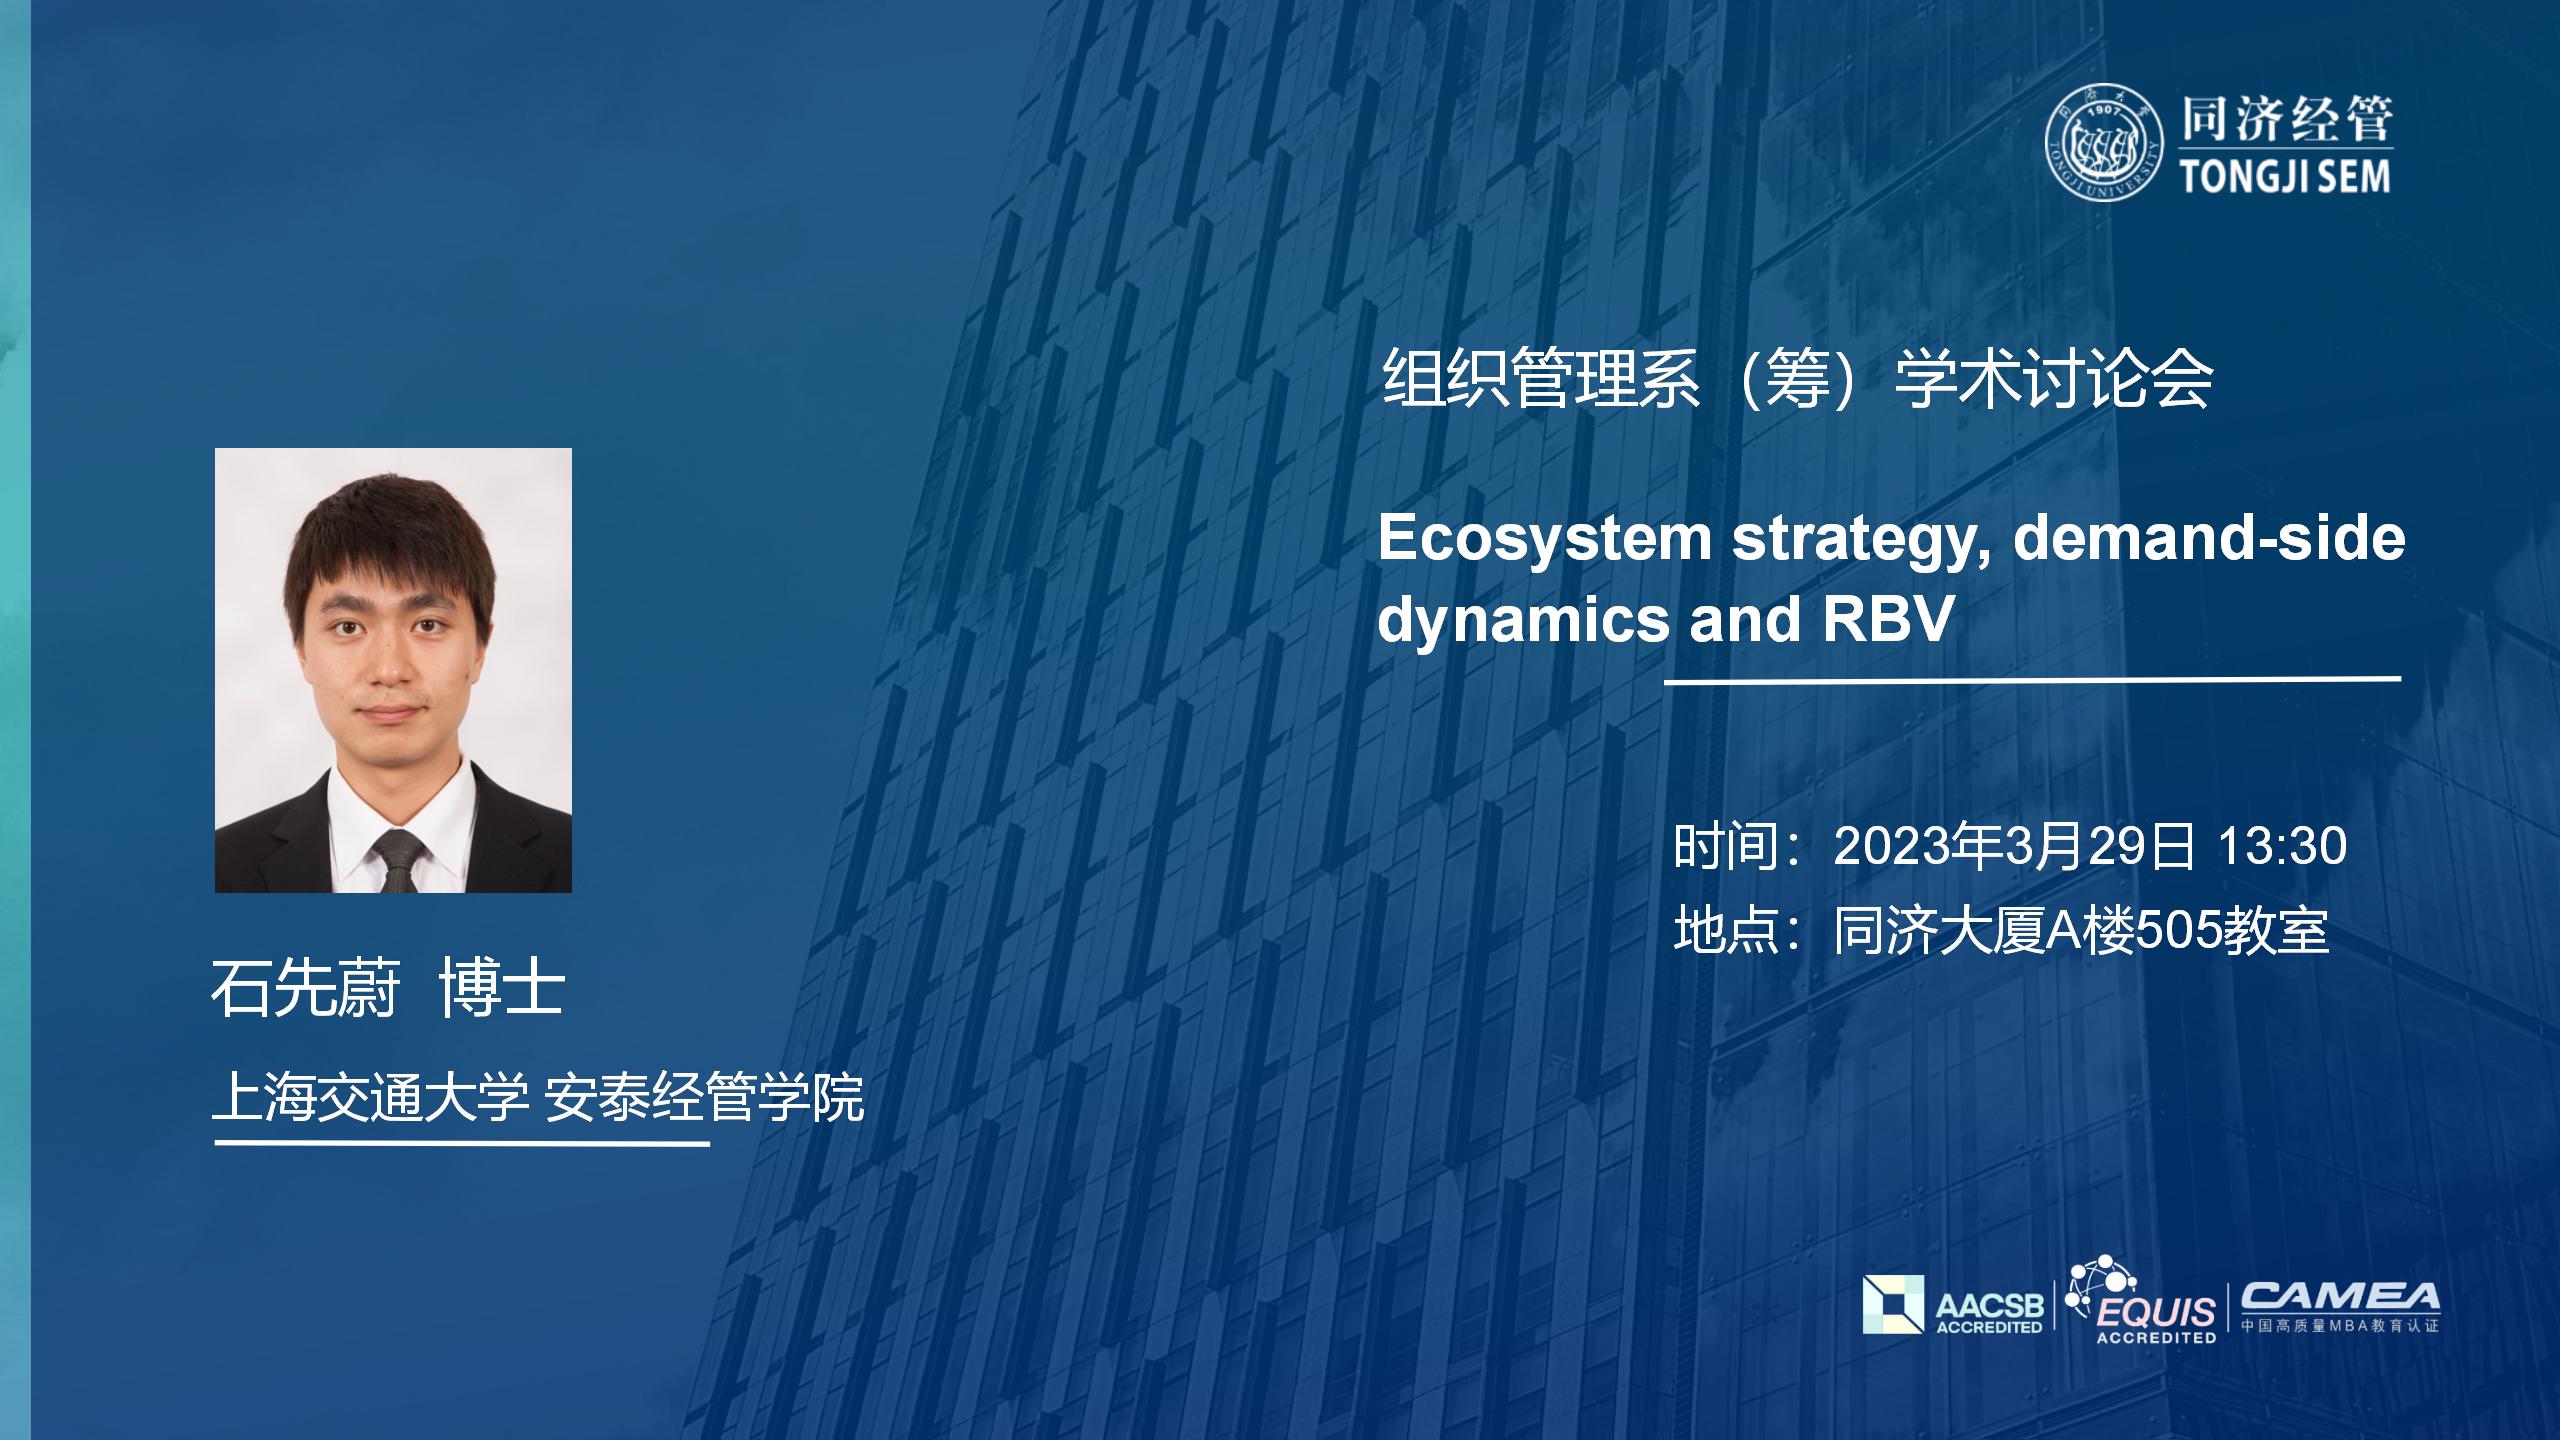 Ecosystem strategy, demand-side dynamics and RBV